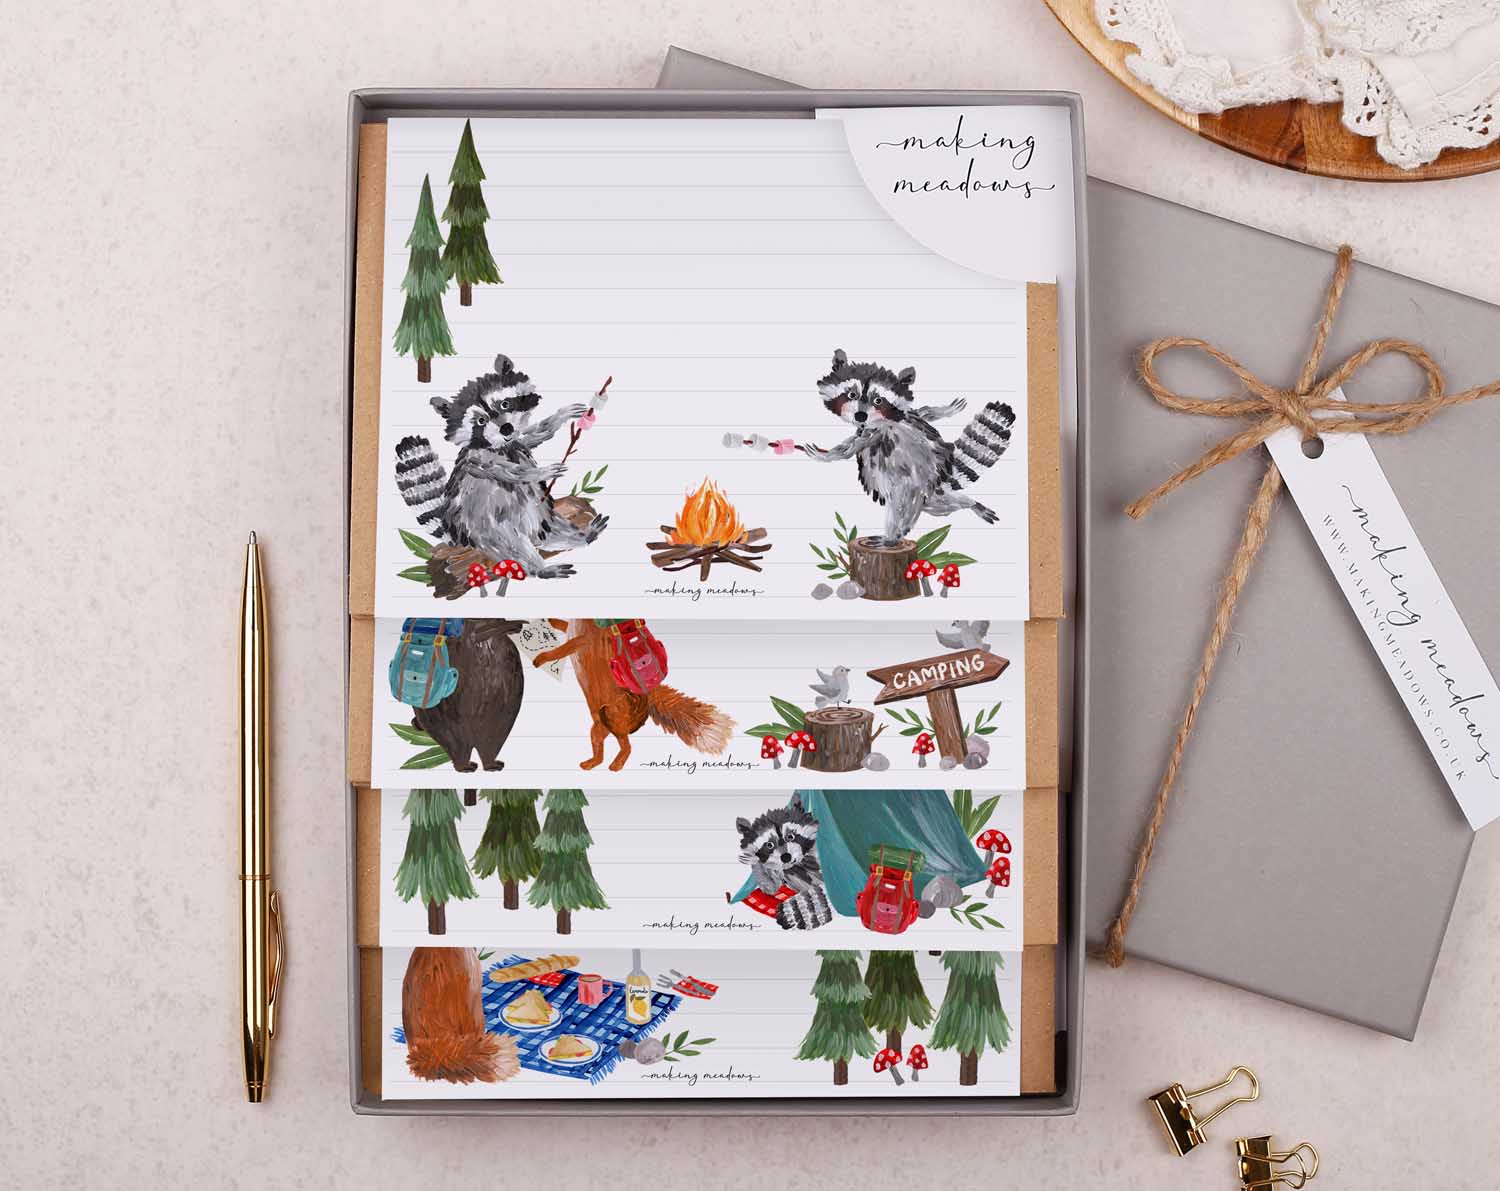 32 sheets of children's camping animal design writing paper in a gift box set.